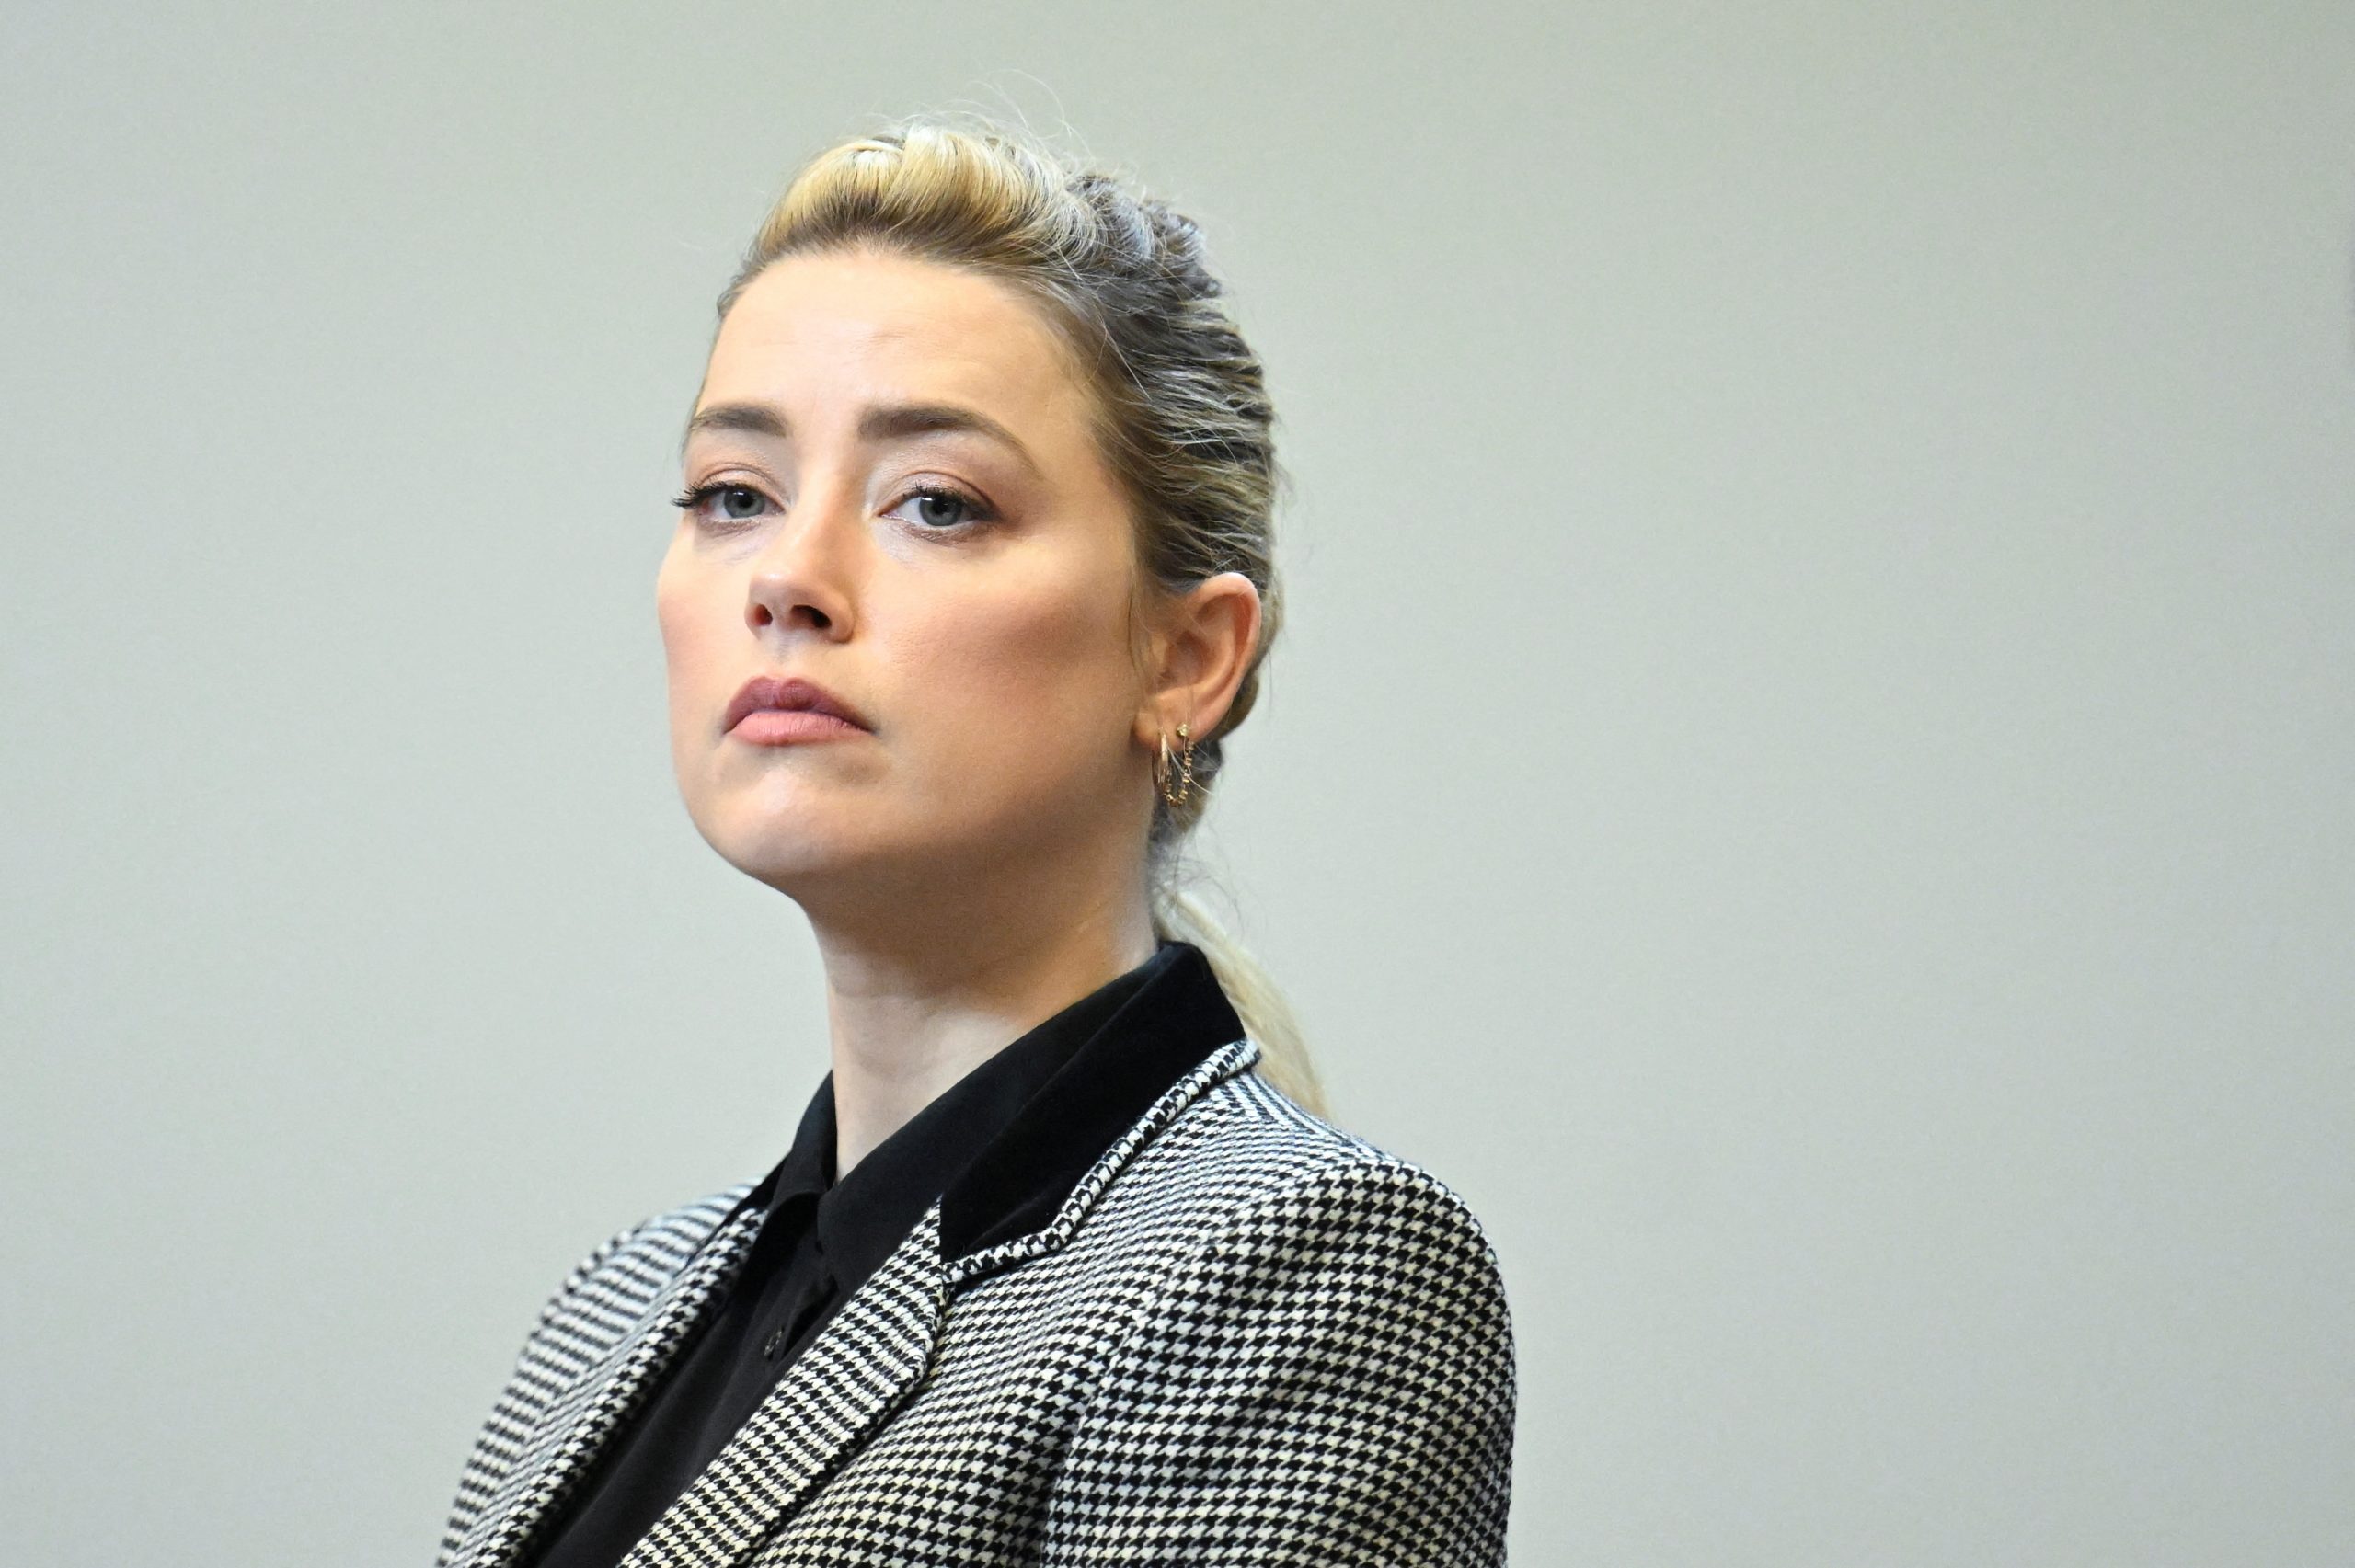 Actor Amber Heard looks on during actor and her ex-husband Johnny Depp's defamation case against her, in the courtroom at the Fairfax County Circuit Courthouse in Fairfax, Virginia, U.S., May 24, 2022. Jim Watson/Pool via REUTERS